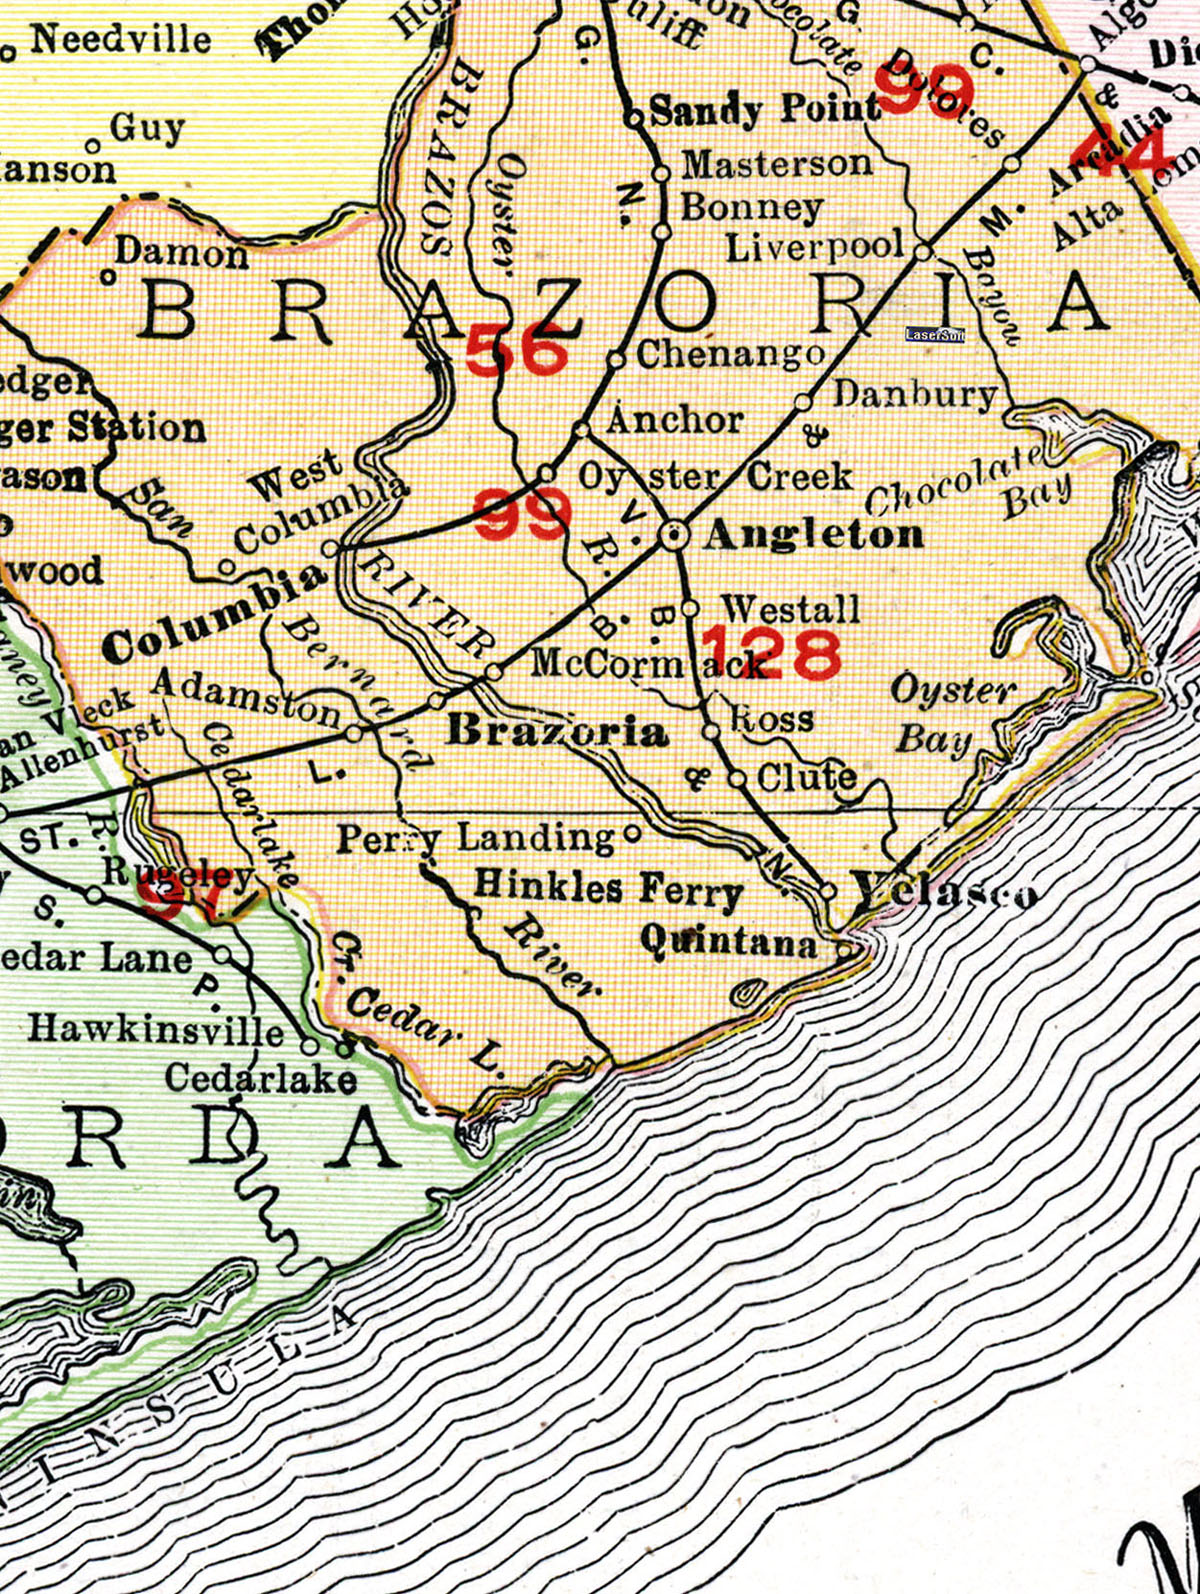 Velasco, Brazos & Northern Railway Company (Tex.), map showing route in 1907.